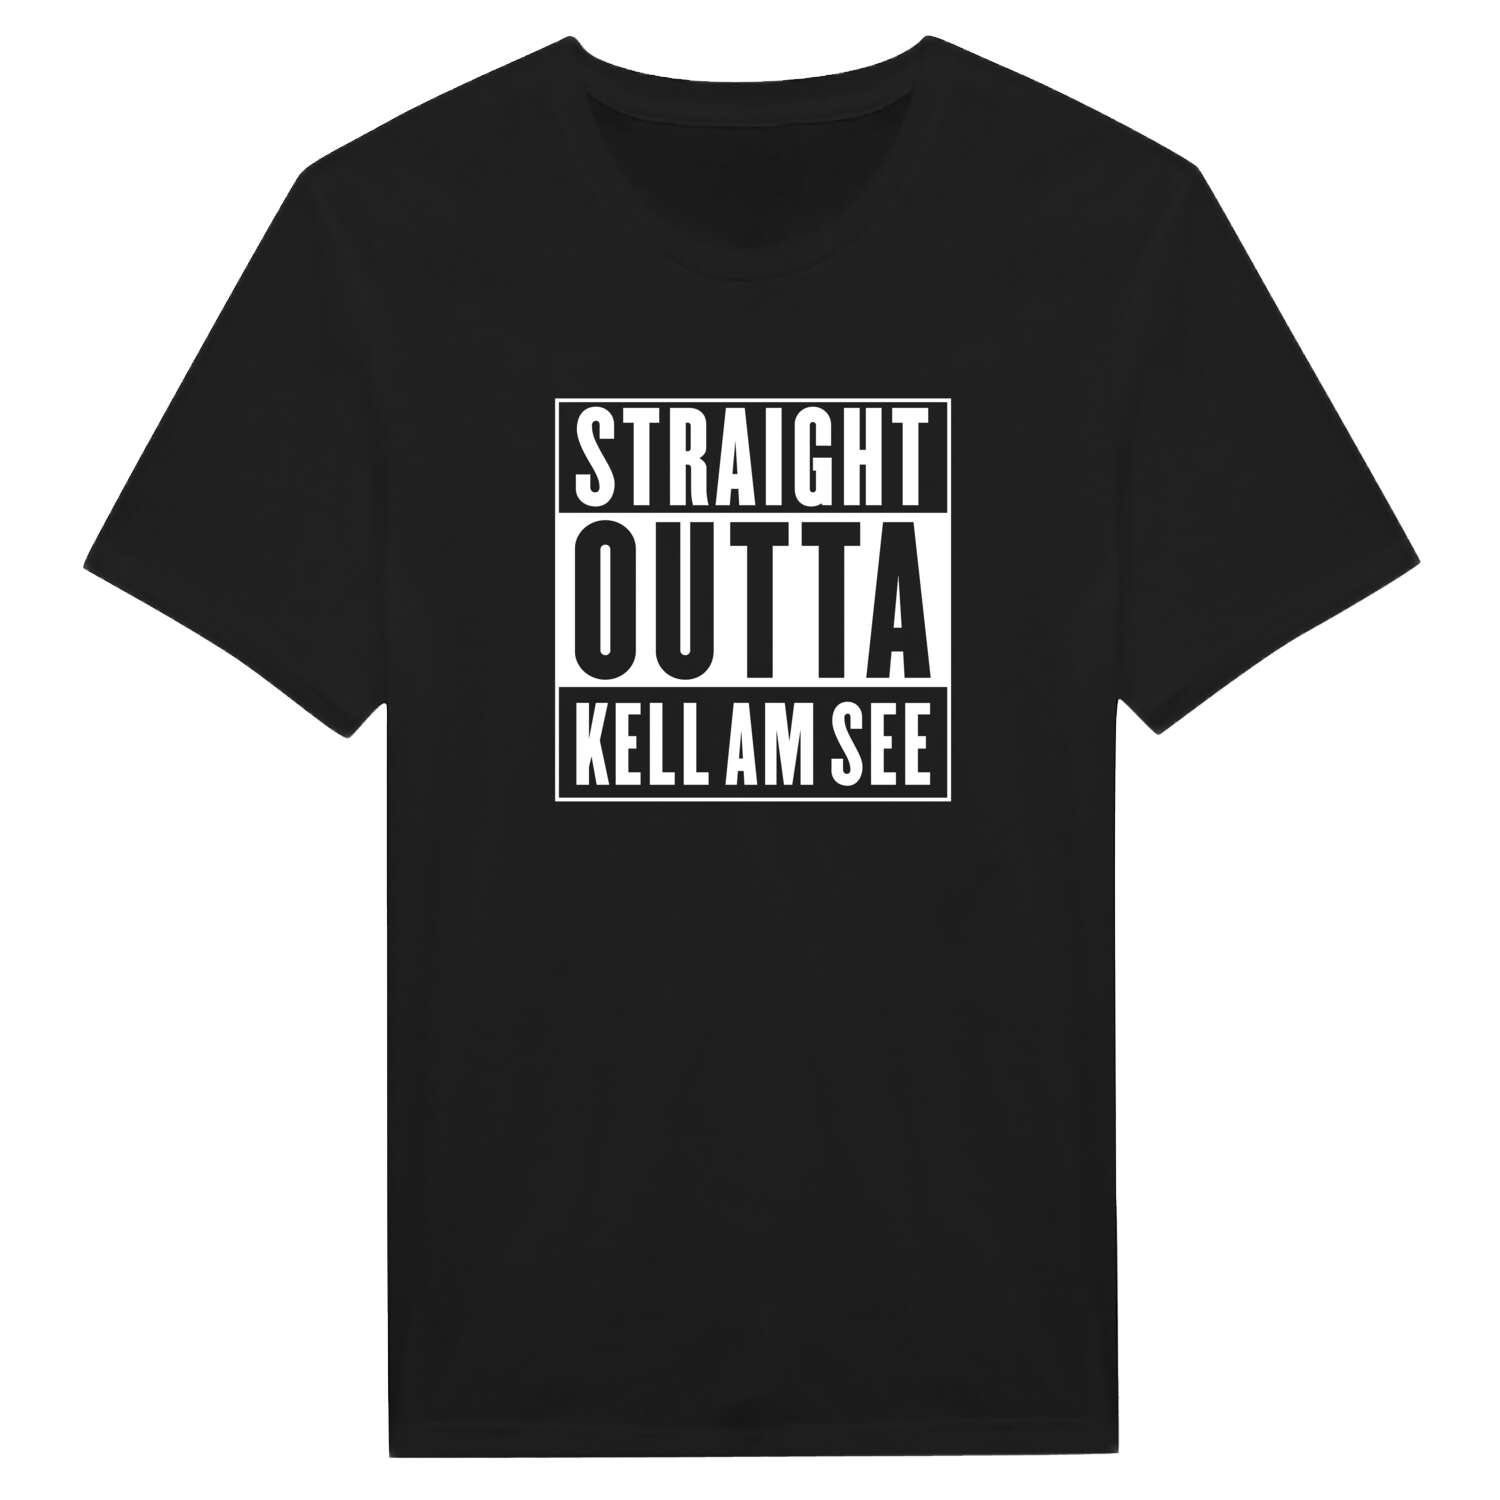 Kell am See T-Shirt »Straight Outta«